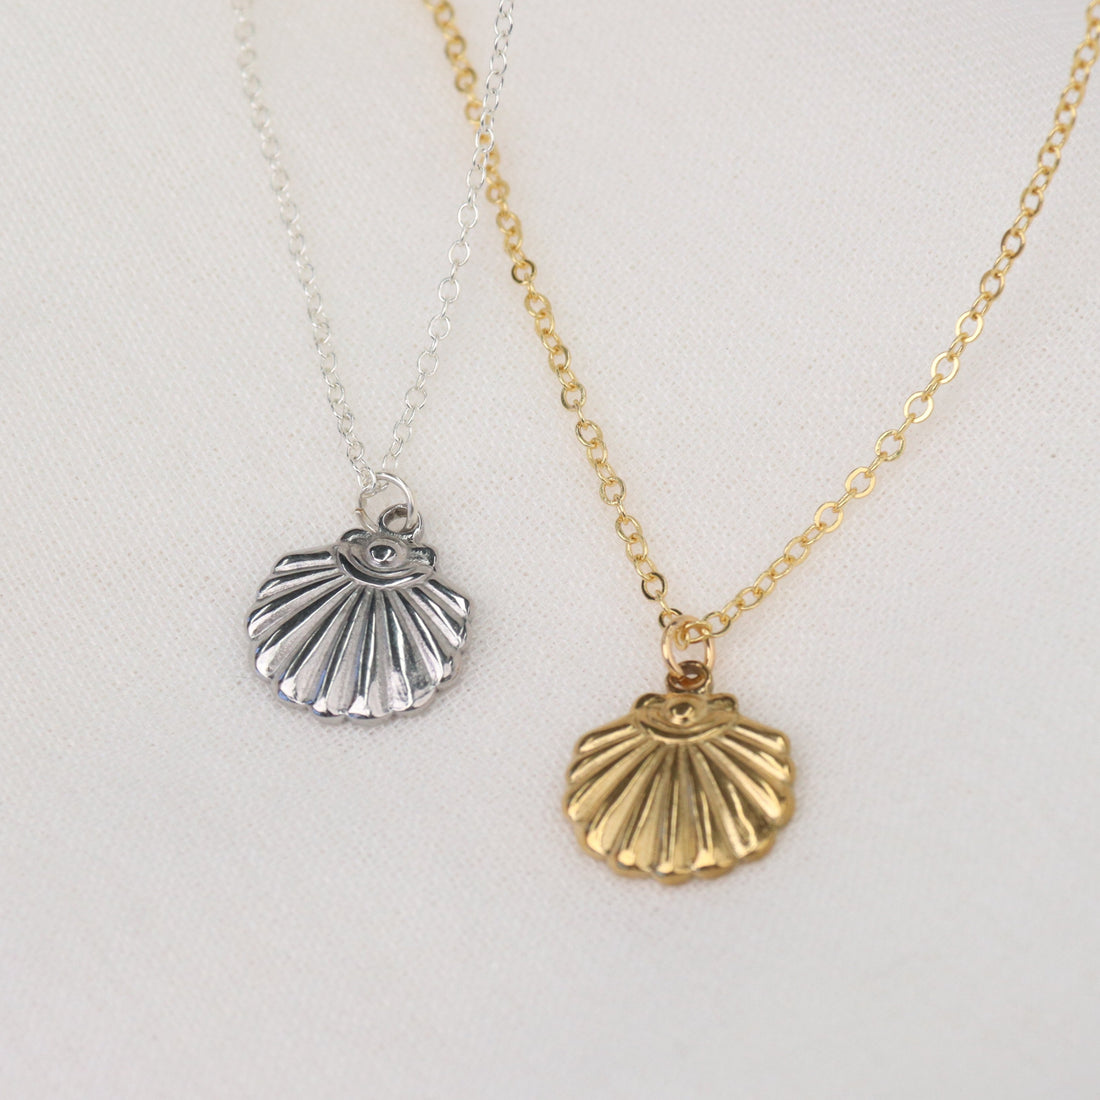 Penida | 18K Gold Plated or Stainless Steel Shell Pendant Necklace